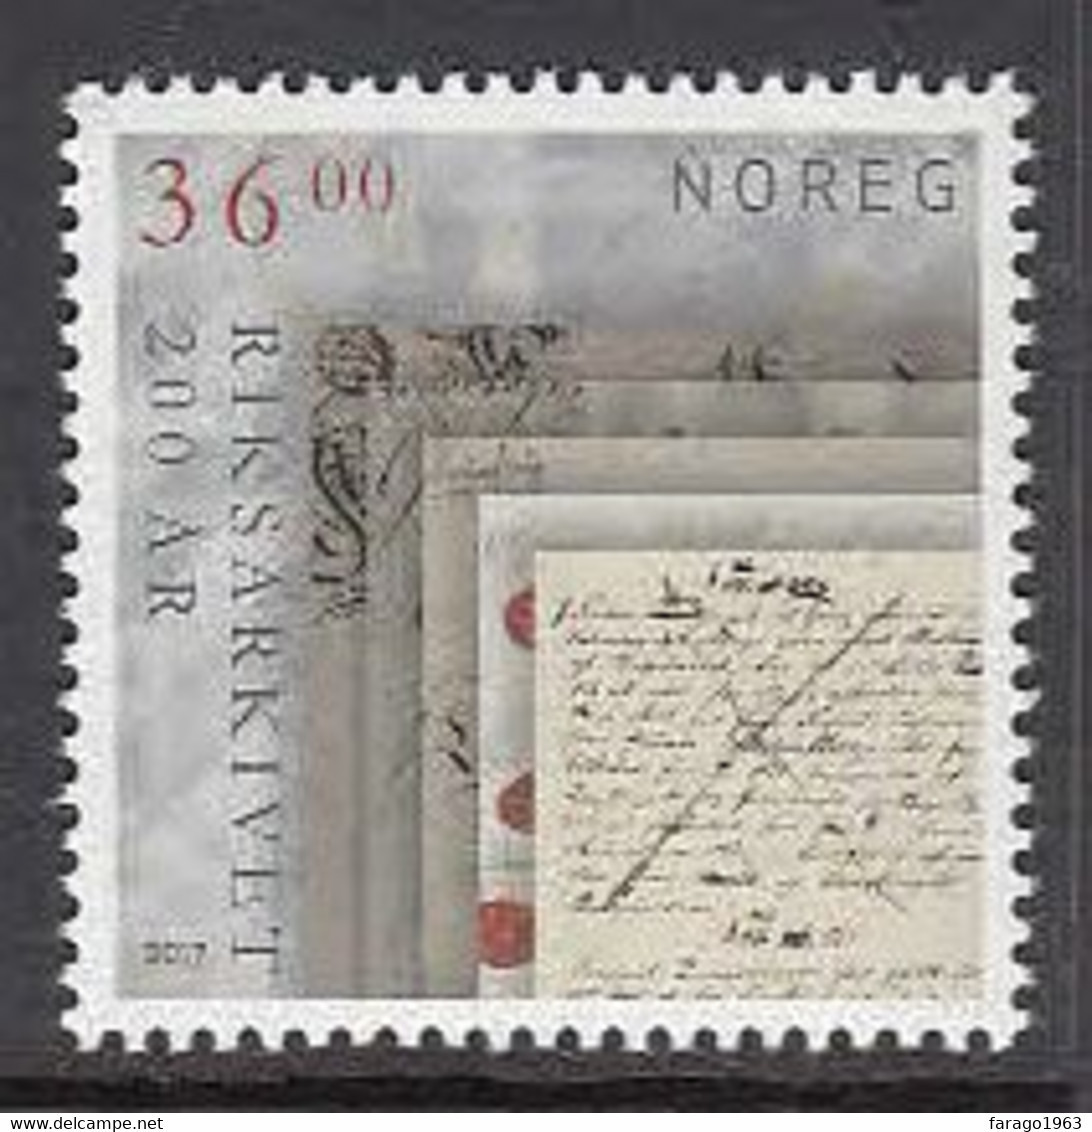 2017 Norway National Archives Complete Set Of 1 MNH @ BELOW FACE VALUE - Neufs